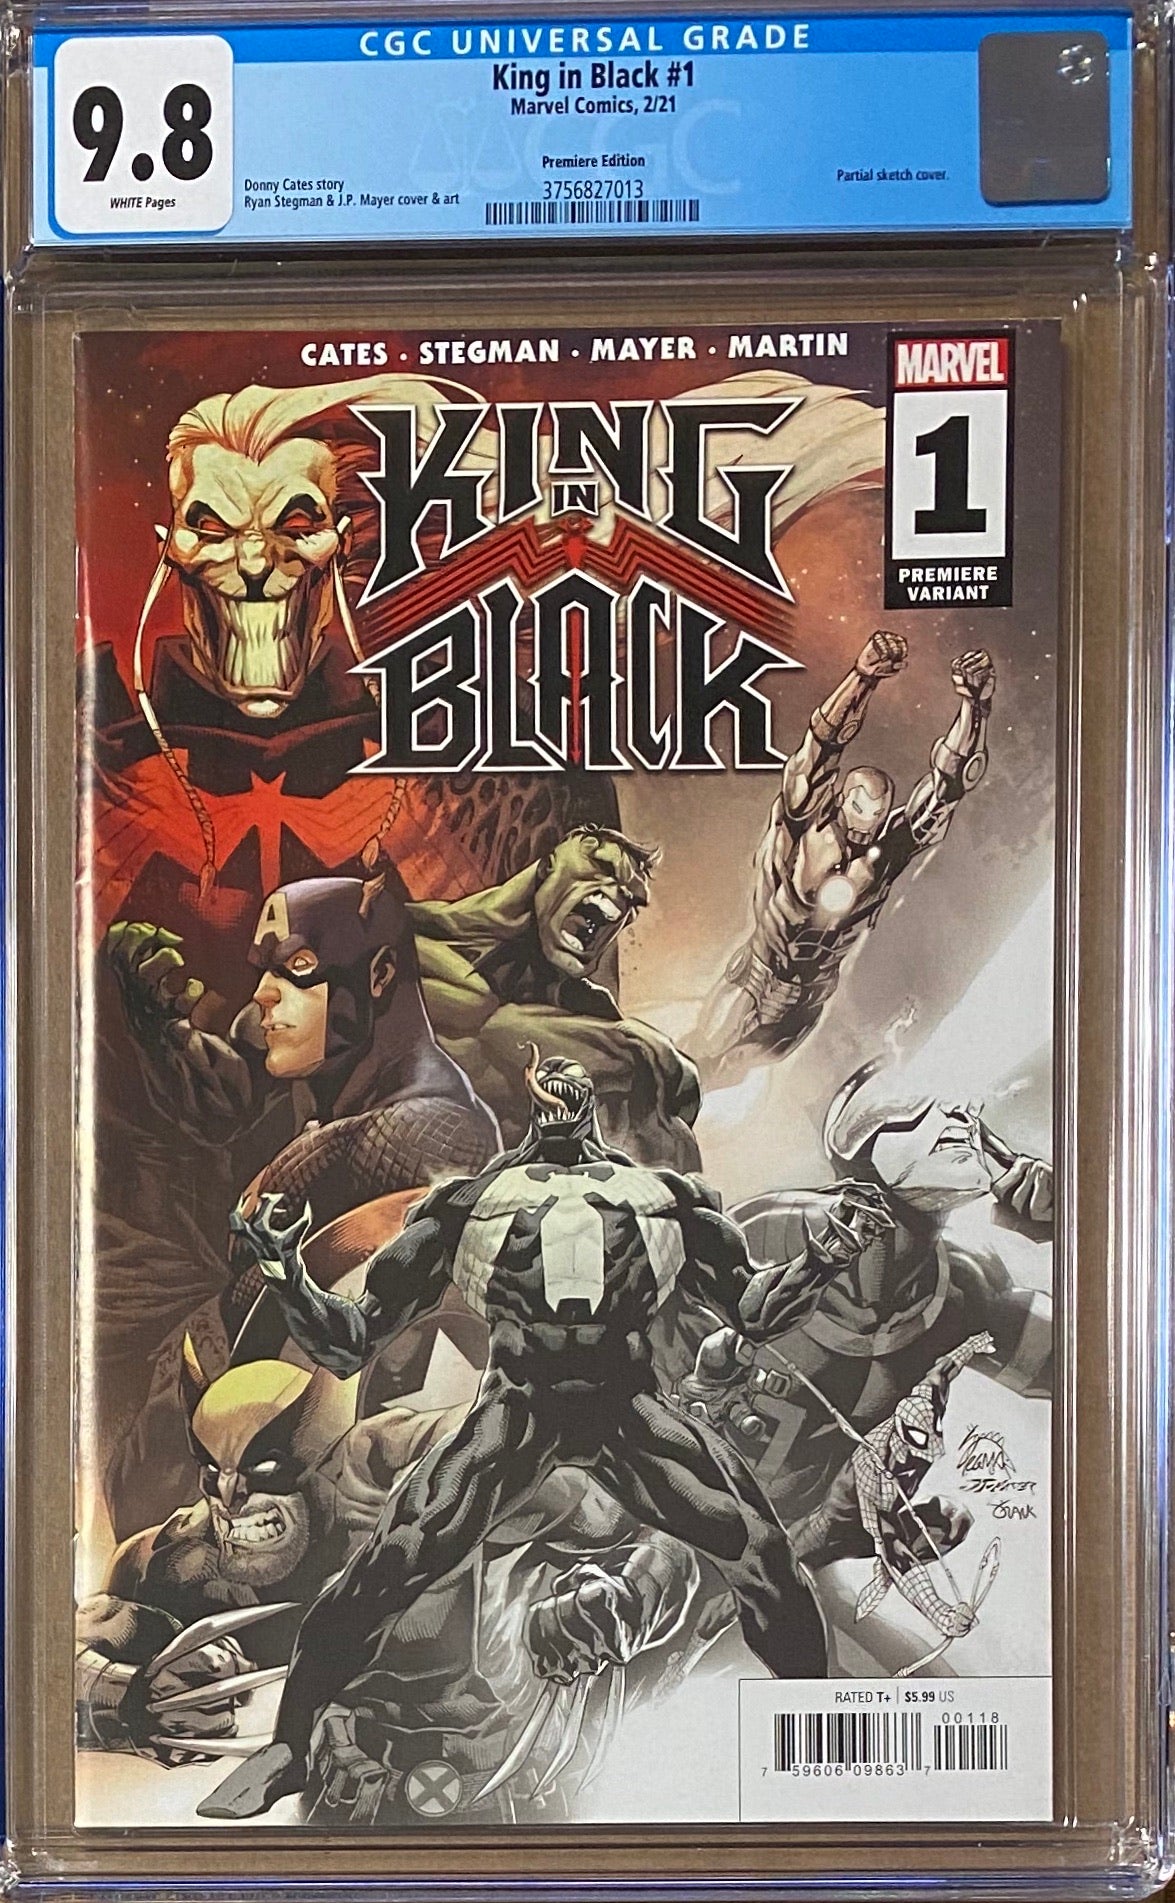 King in Black #1 Premiere Edition Retailer Incentive Variant CGC 9.8